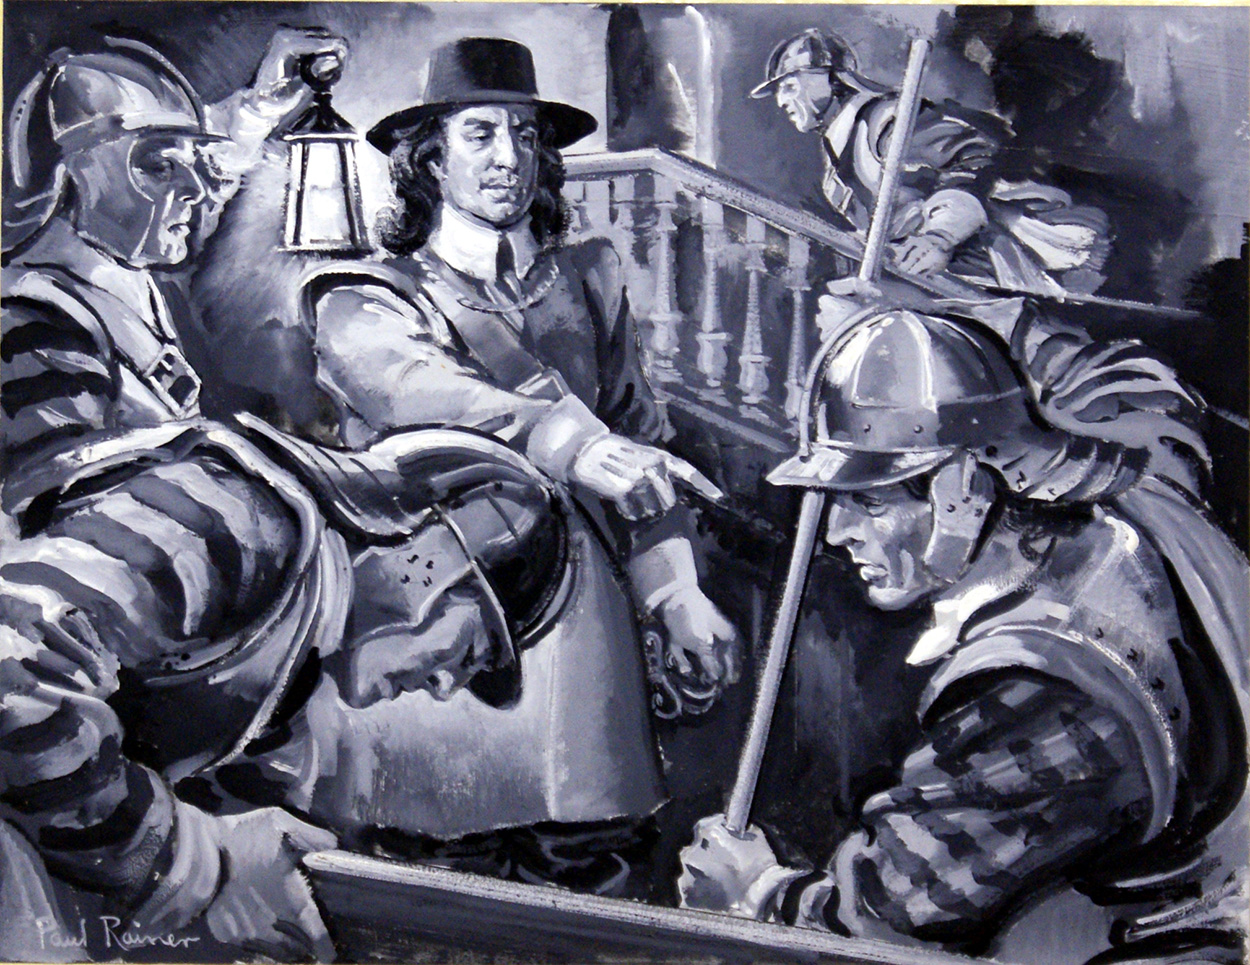 Cromwell and Roundheads (Original) (Signed) art by Paul Rainer at The Illustration Art Gallery